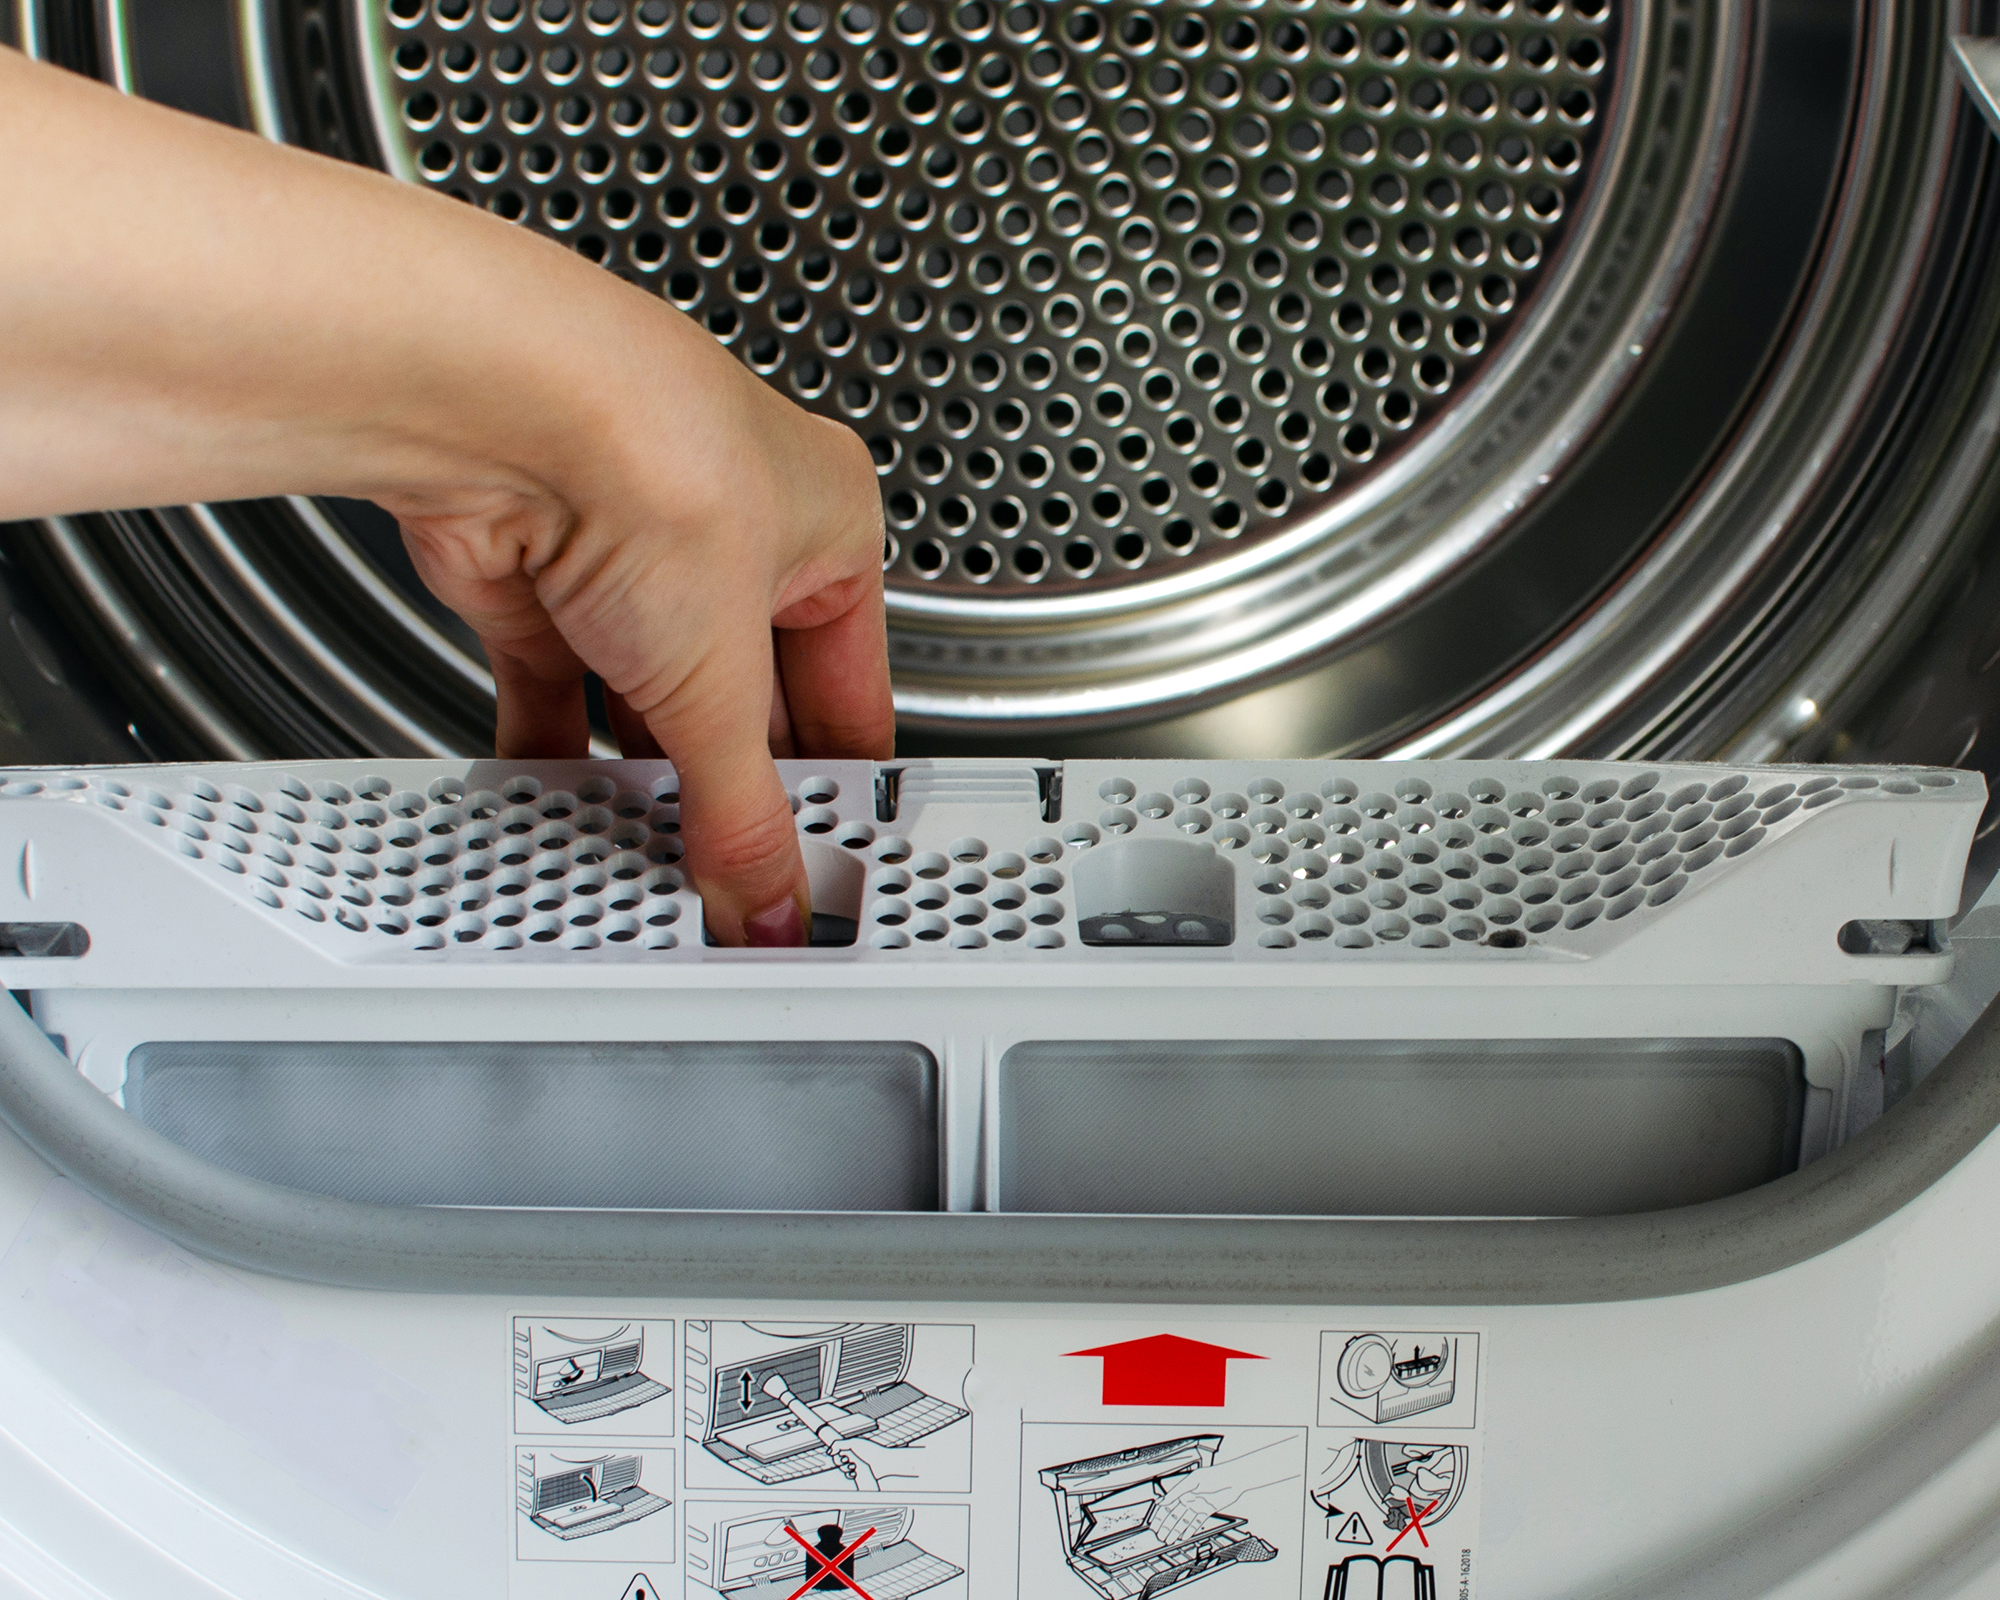 A woman's hand removing lint filter from the dryer